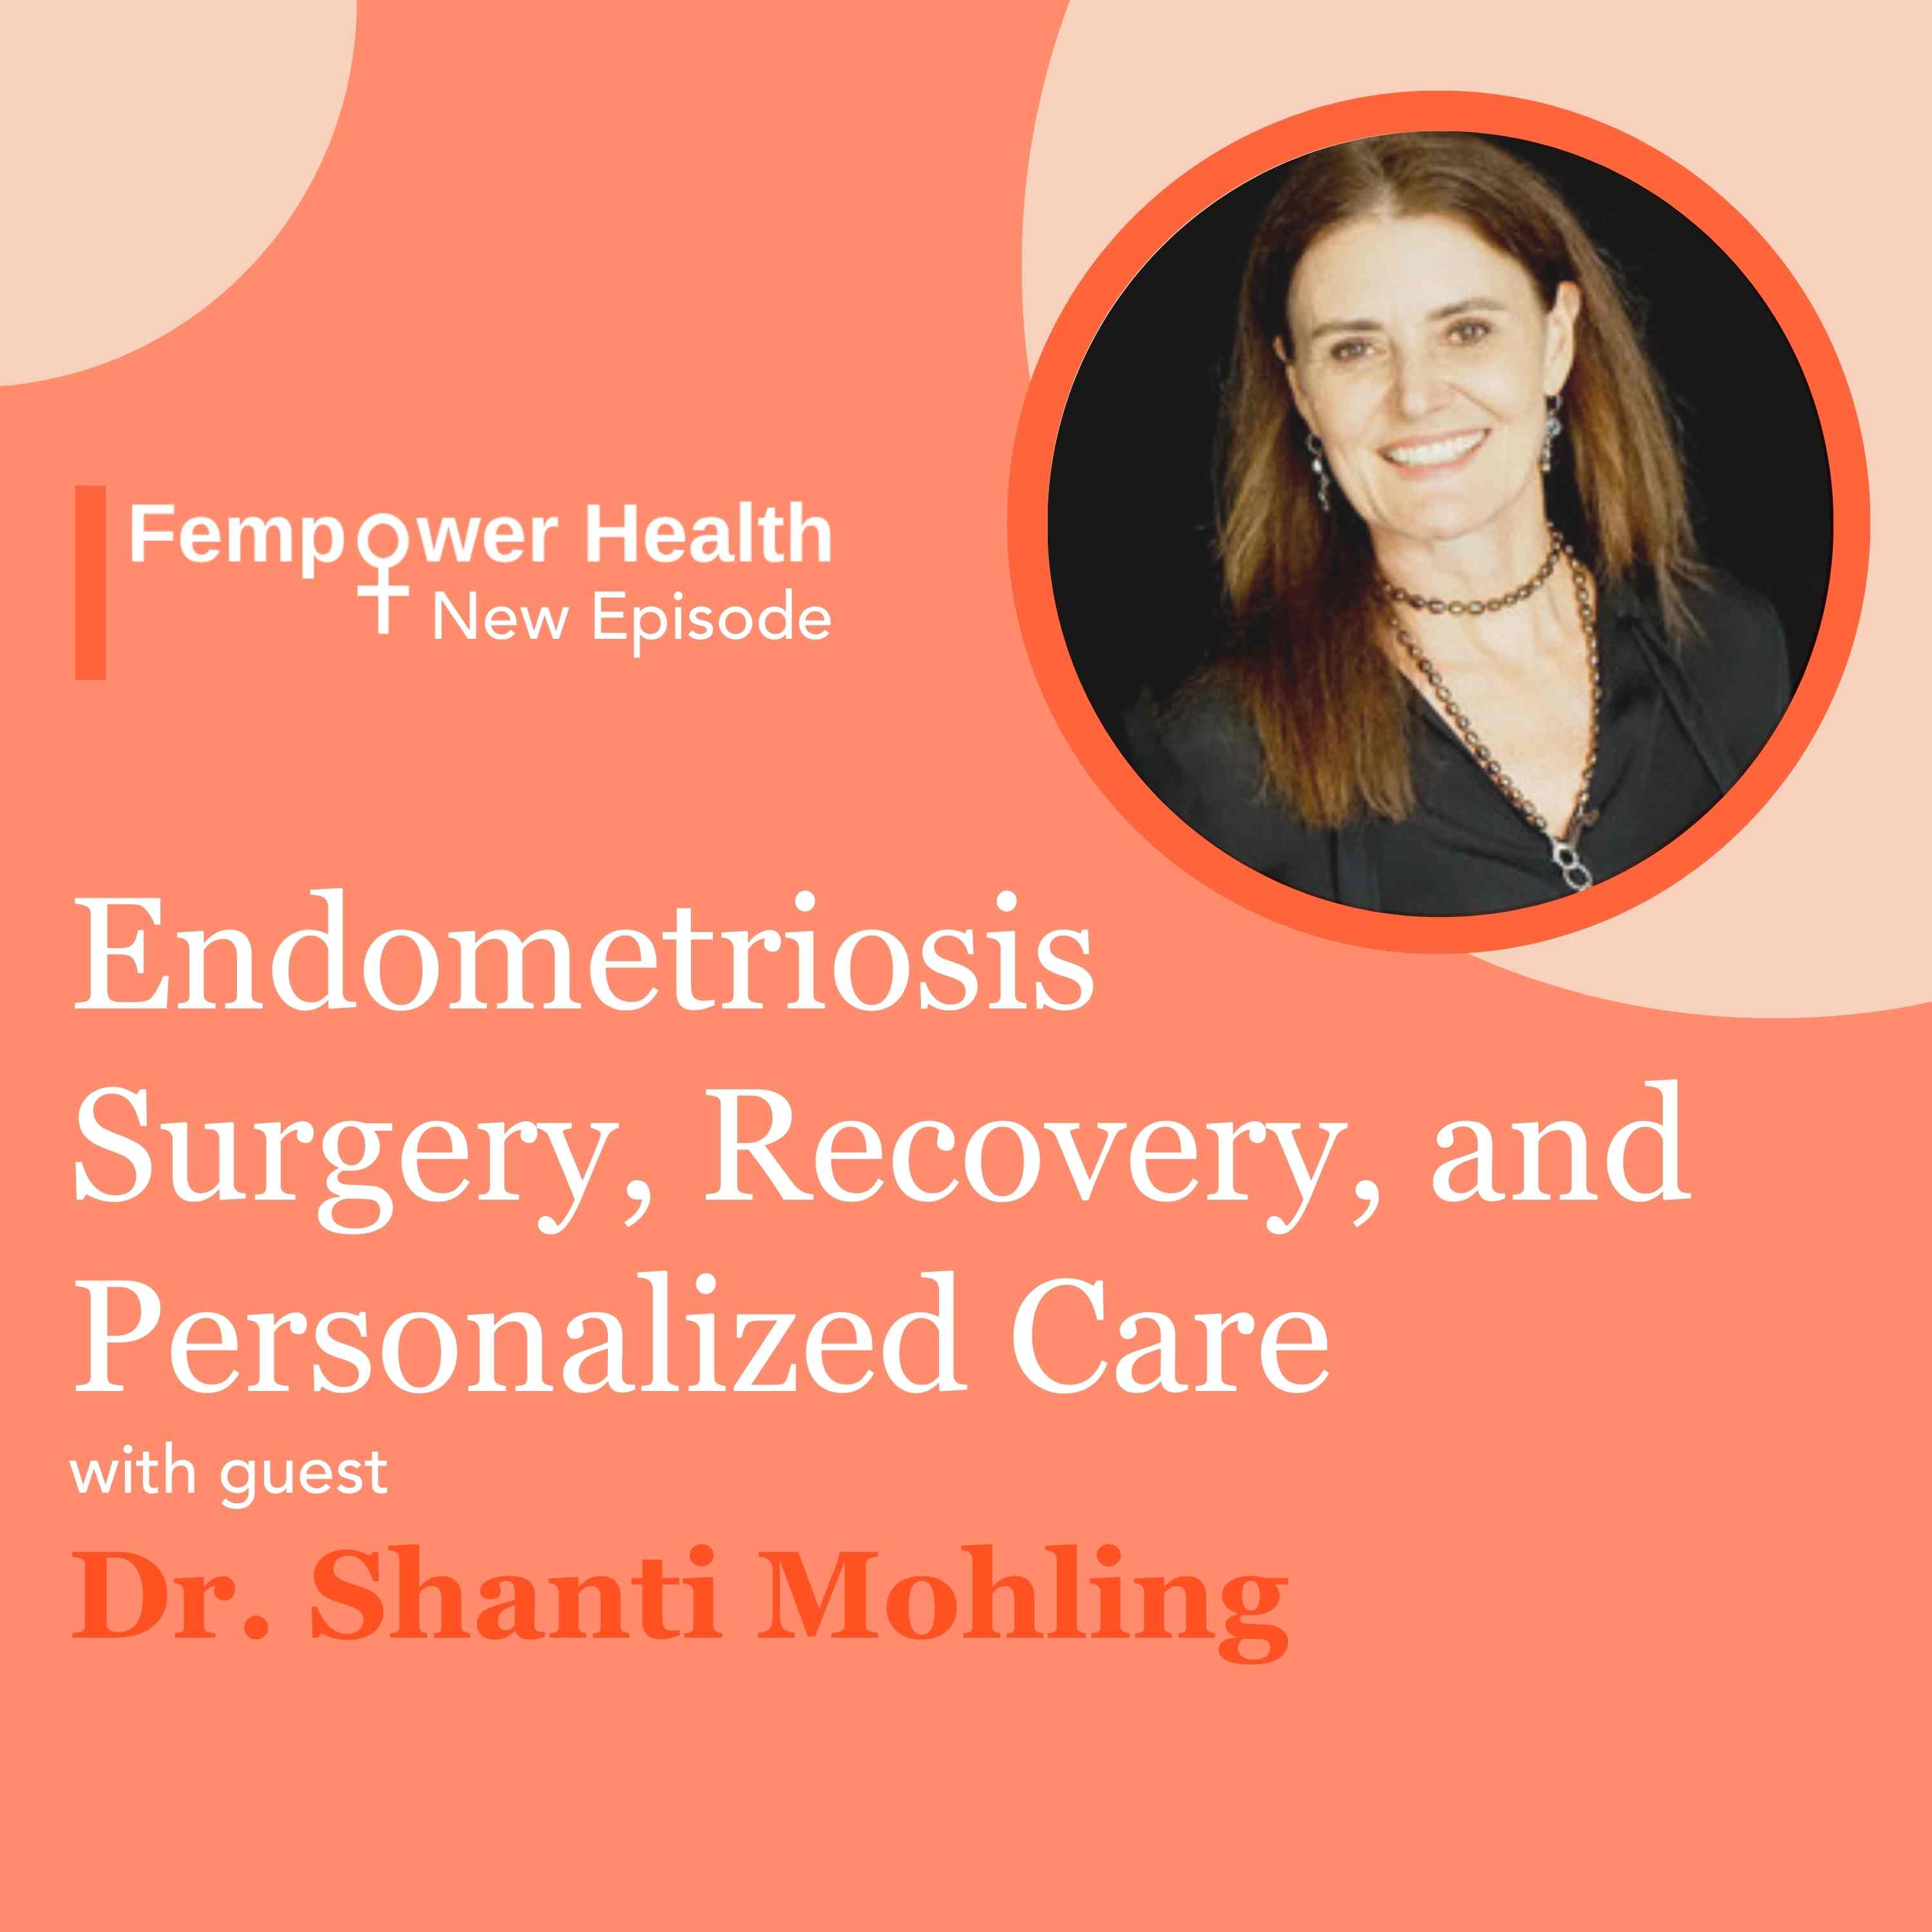 Endometriosis Surgery, Recovery, and Personalized Care | Dr. Shanti Mohling